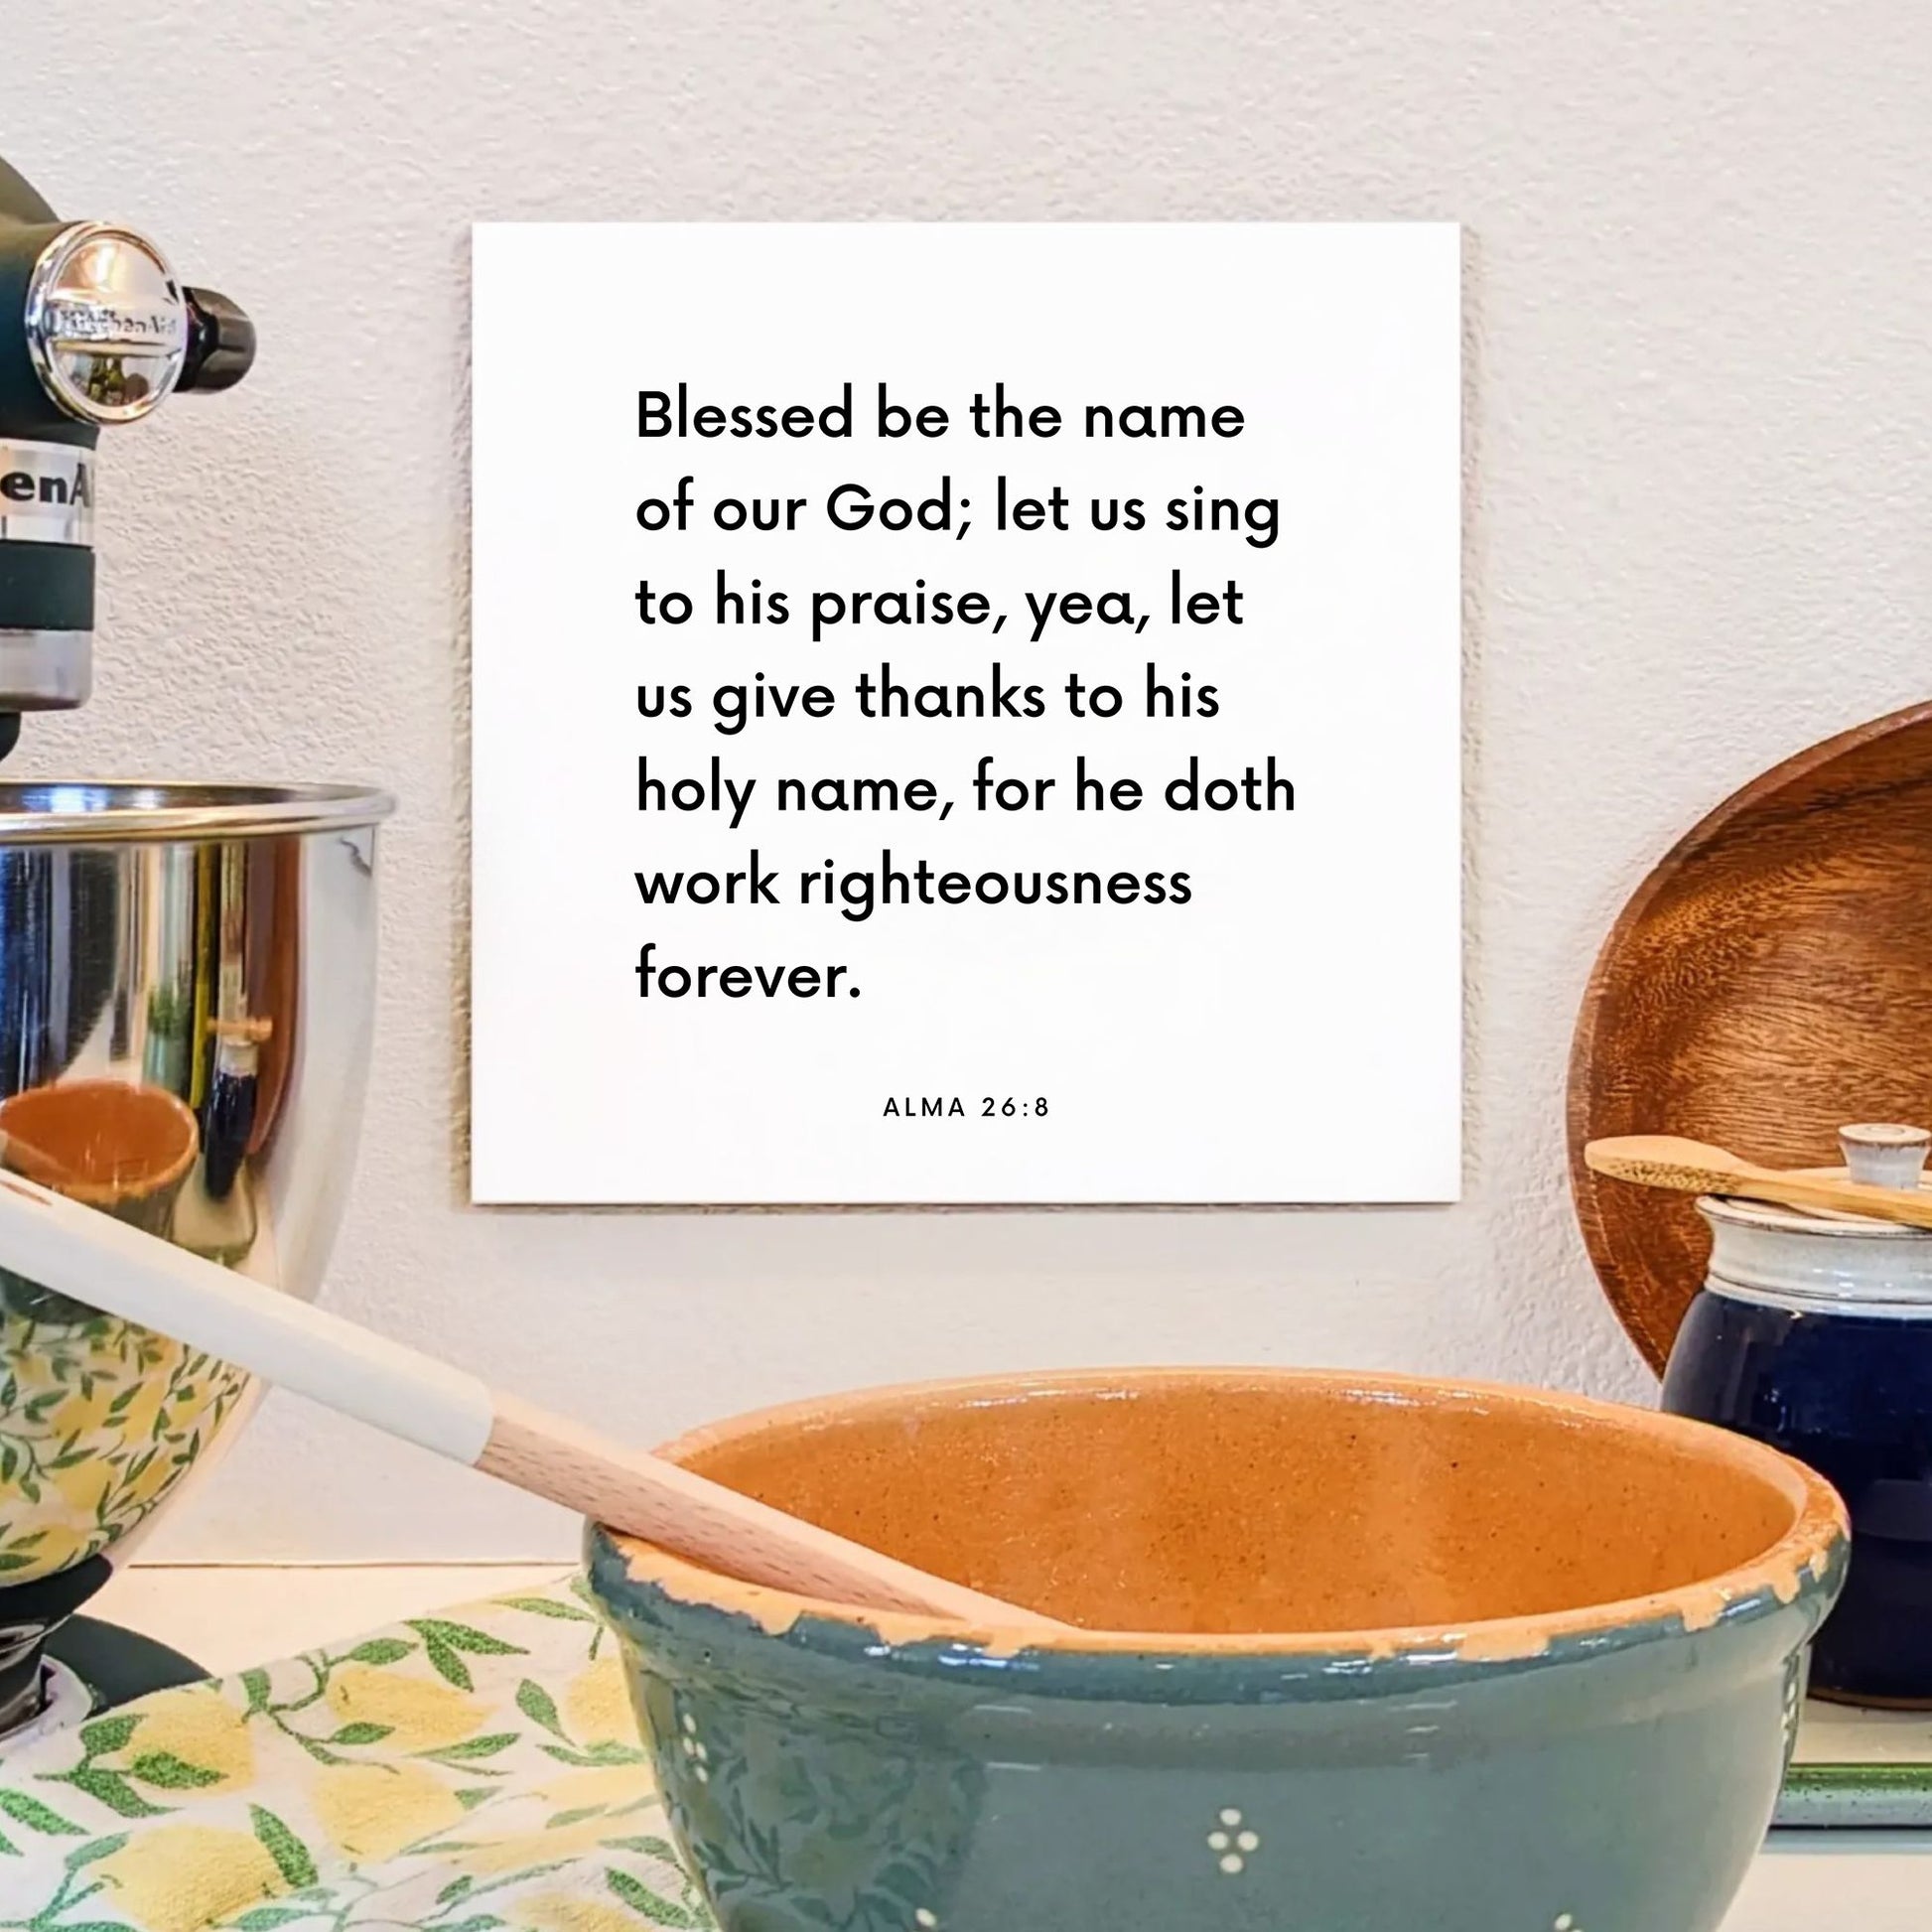 Kitchen mouting of the scripture tile for Alma 26:8 - "Let us give thanks to his holy name"